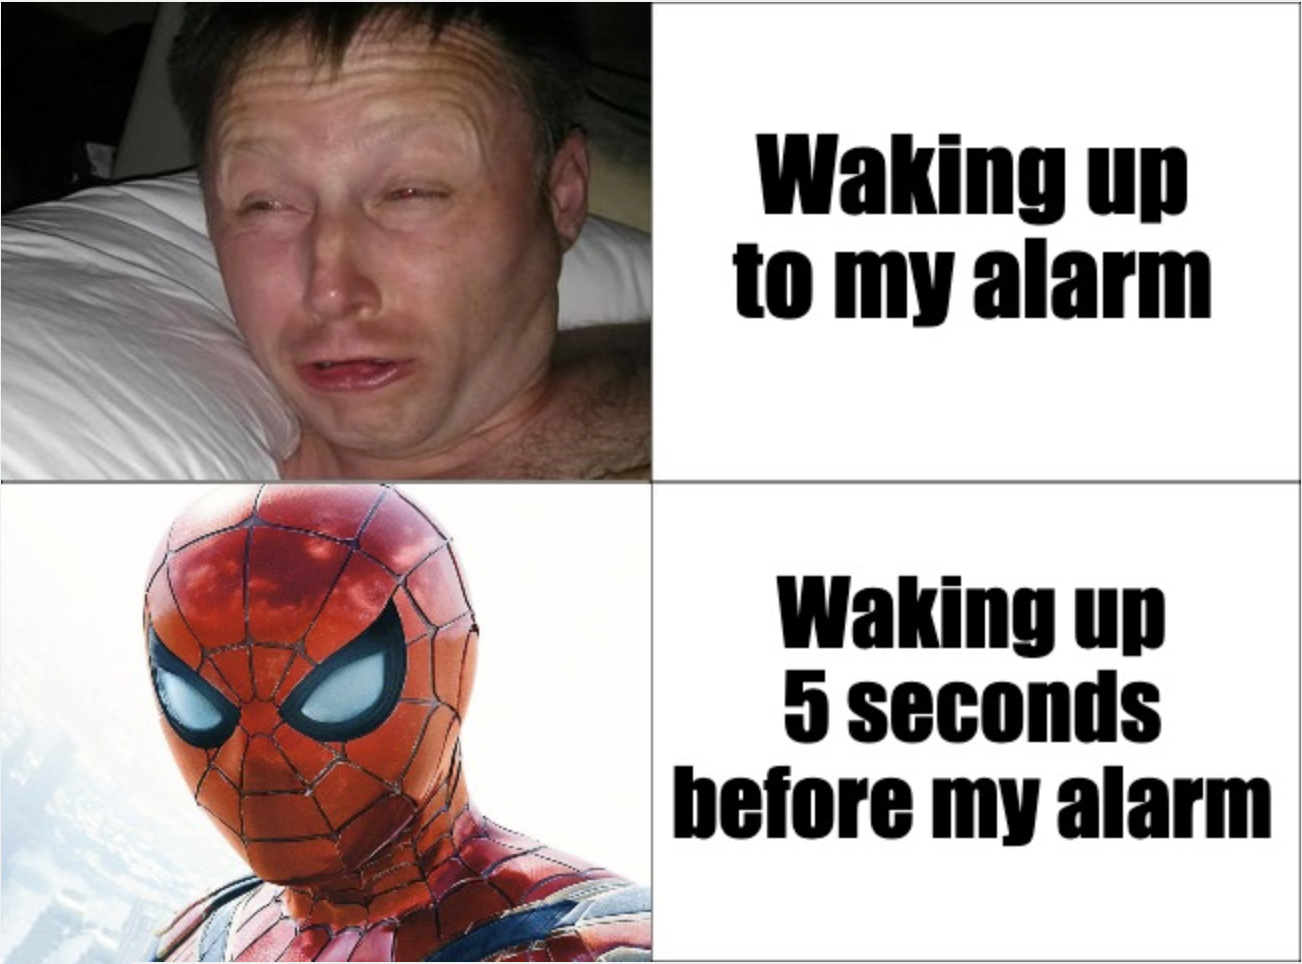 dank memes - funny memes - head - Waking up to my alarm Waking up 5 seconds before my alarm